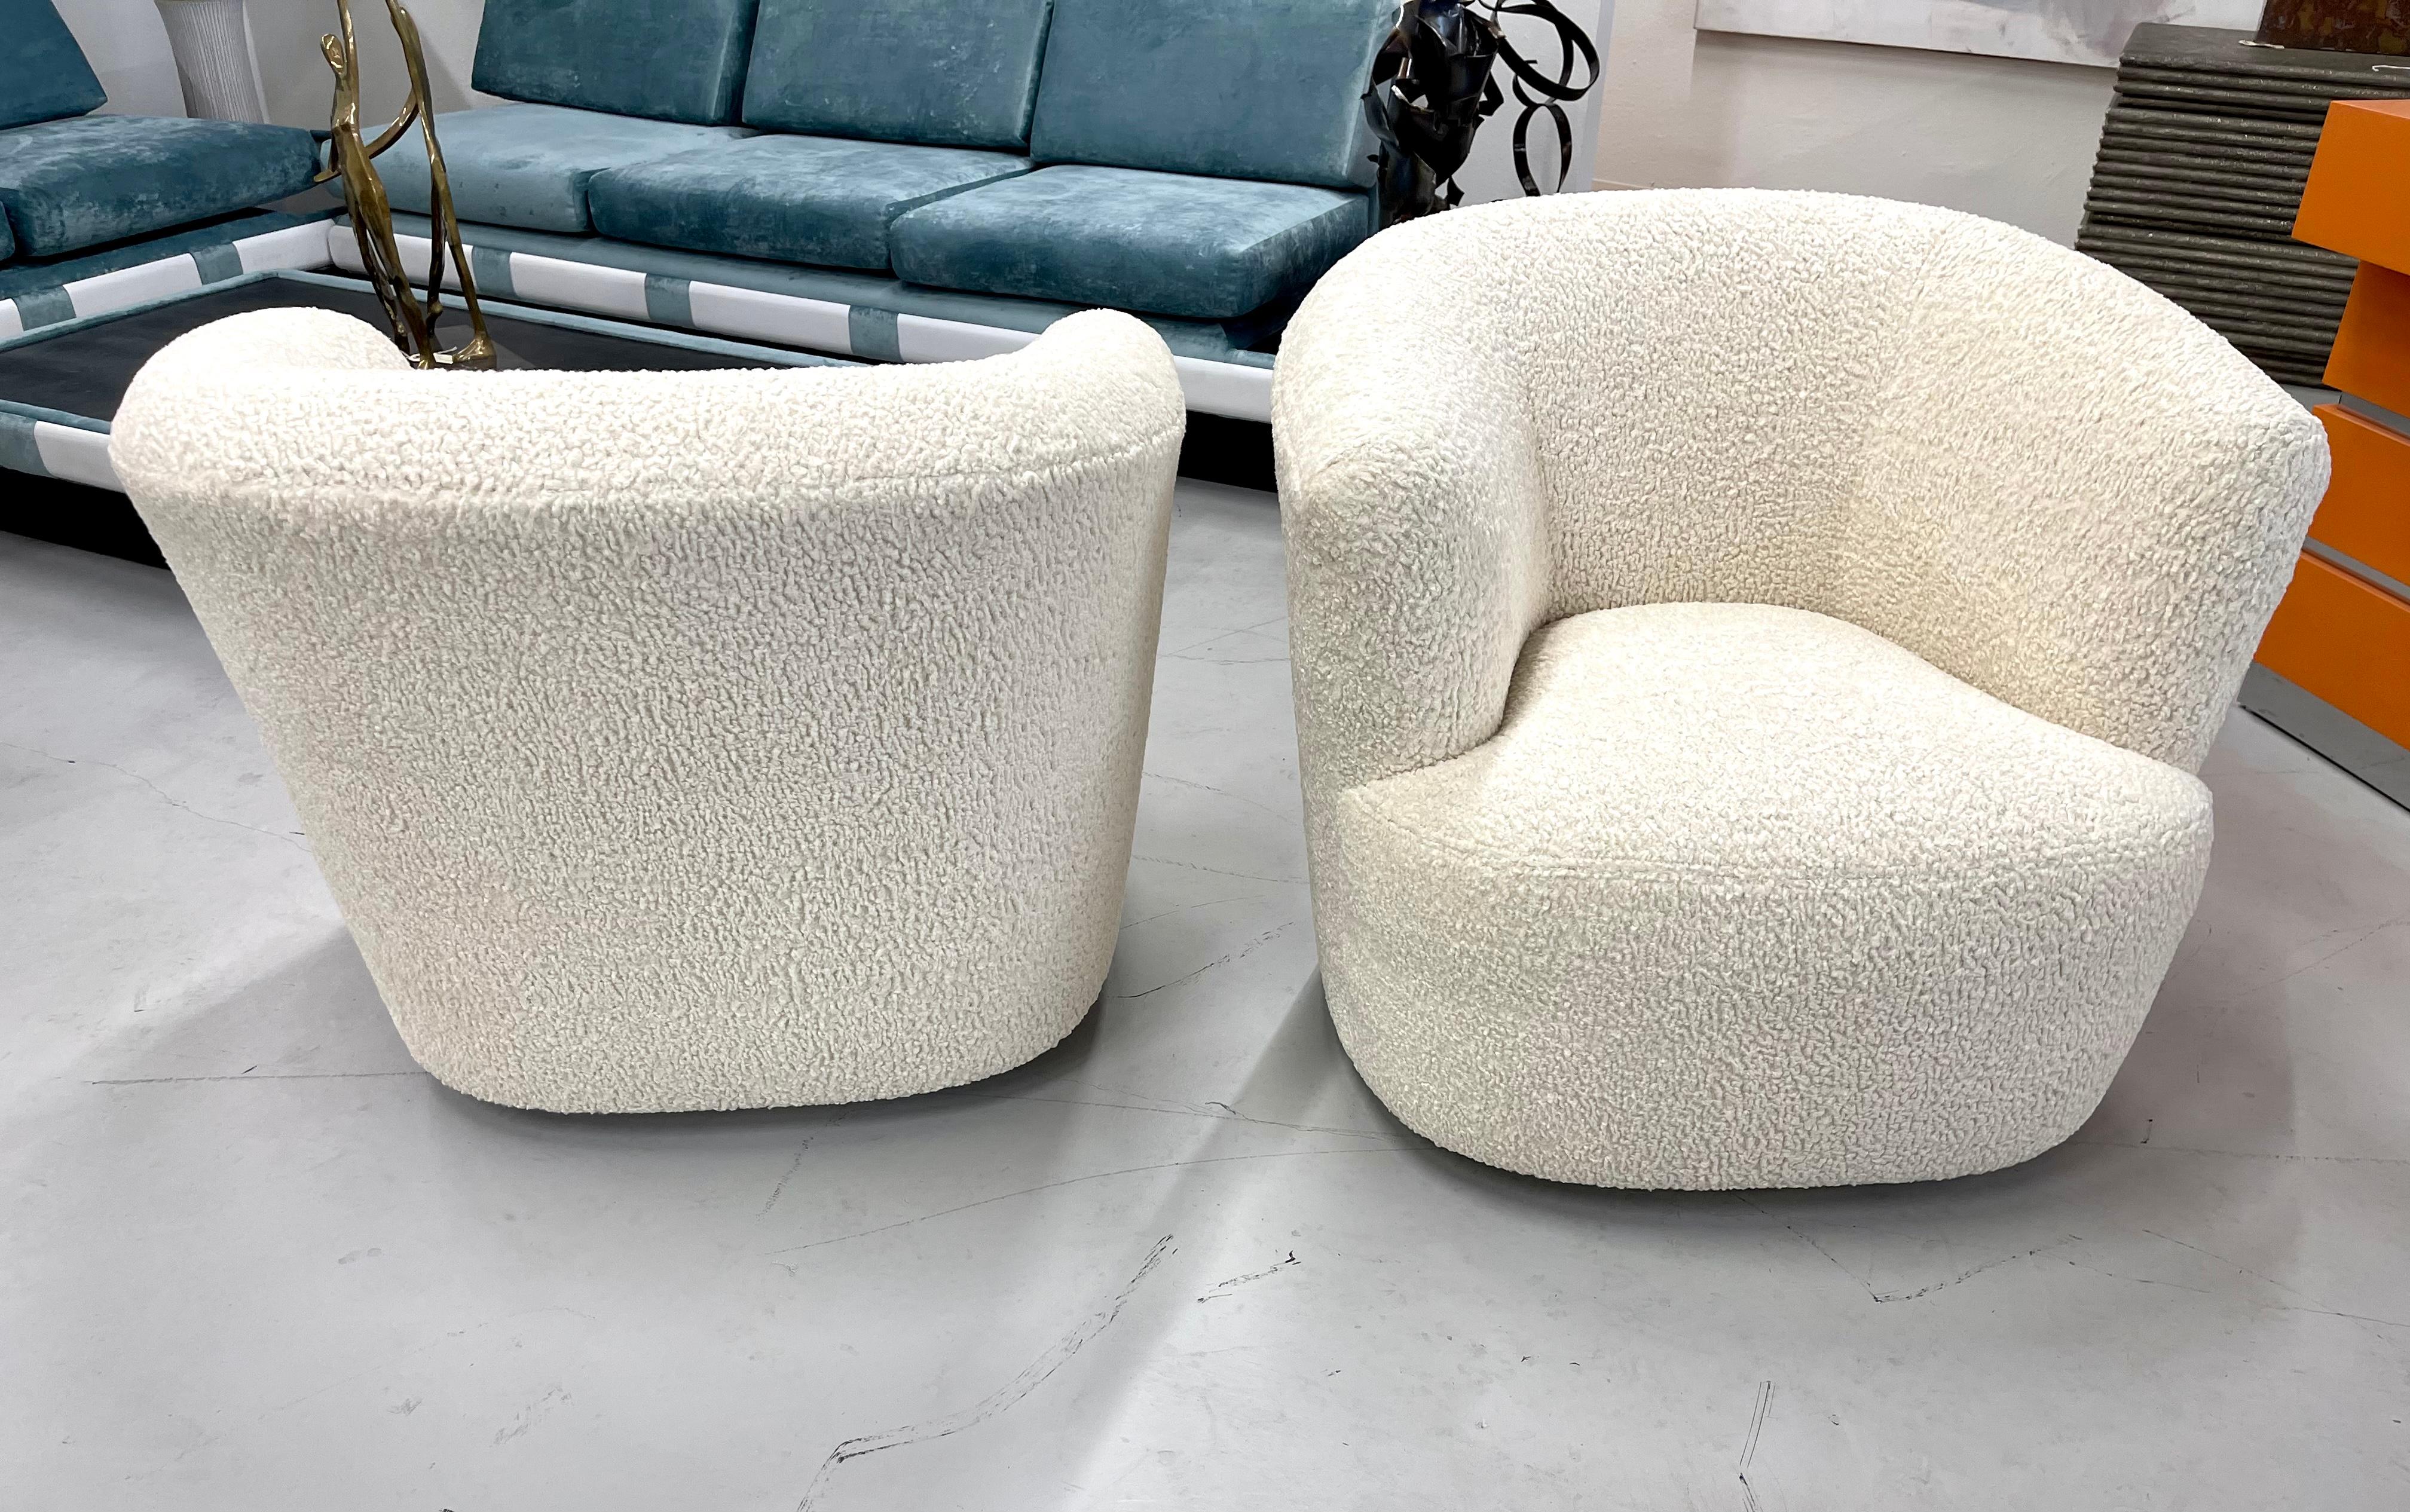 A Beautiful pair of barrel swivel chairs re-upholstered in an Italian faux Sheepskin fabric. The fabric is a Polyester blend. On fabric covered bases. Great form and style. Pictured in our gallery next to a Vladimir Kagan 7 foot sofa and a Laverne